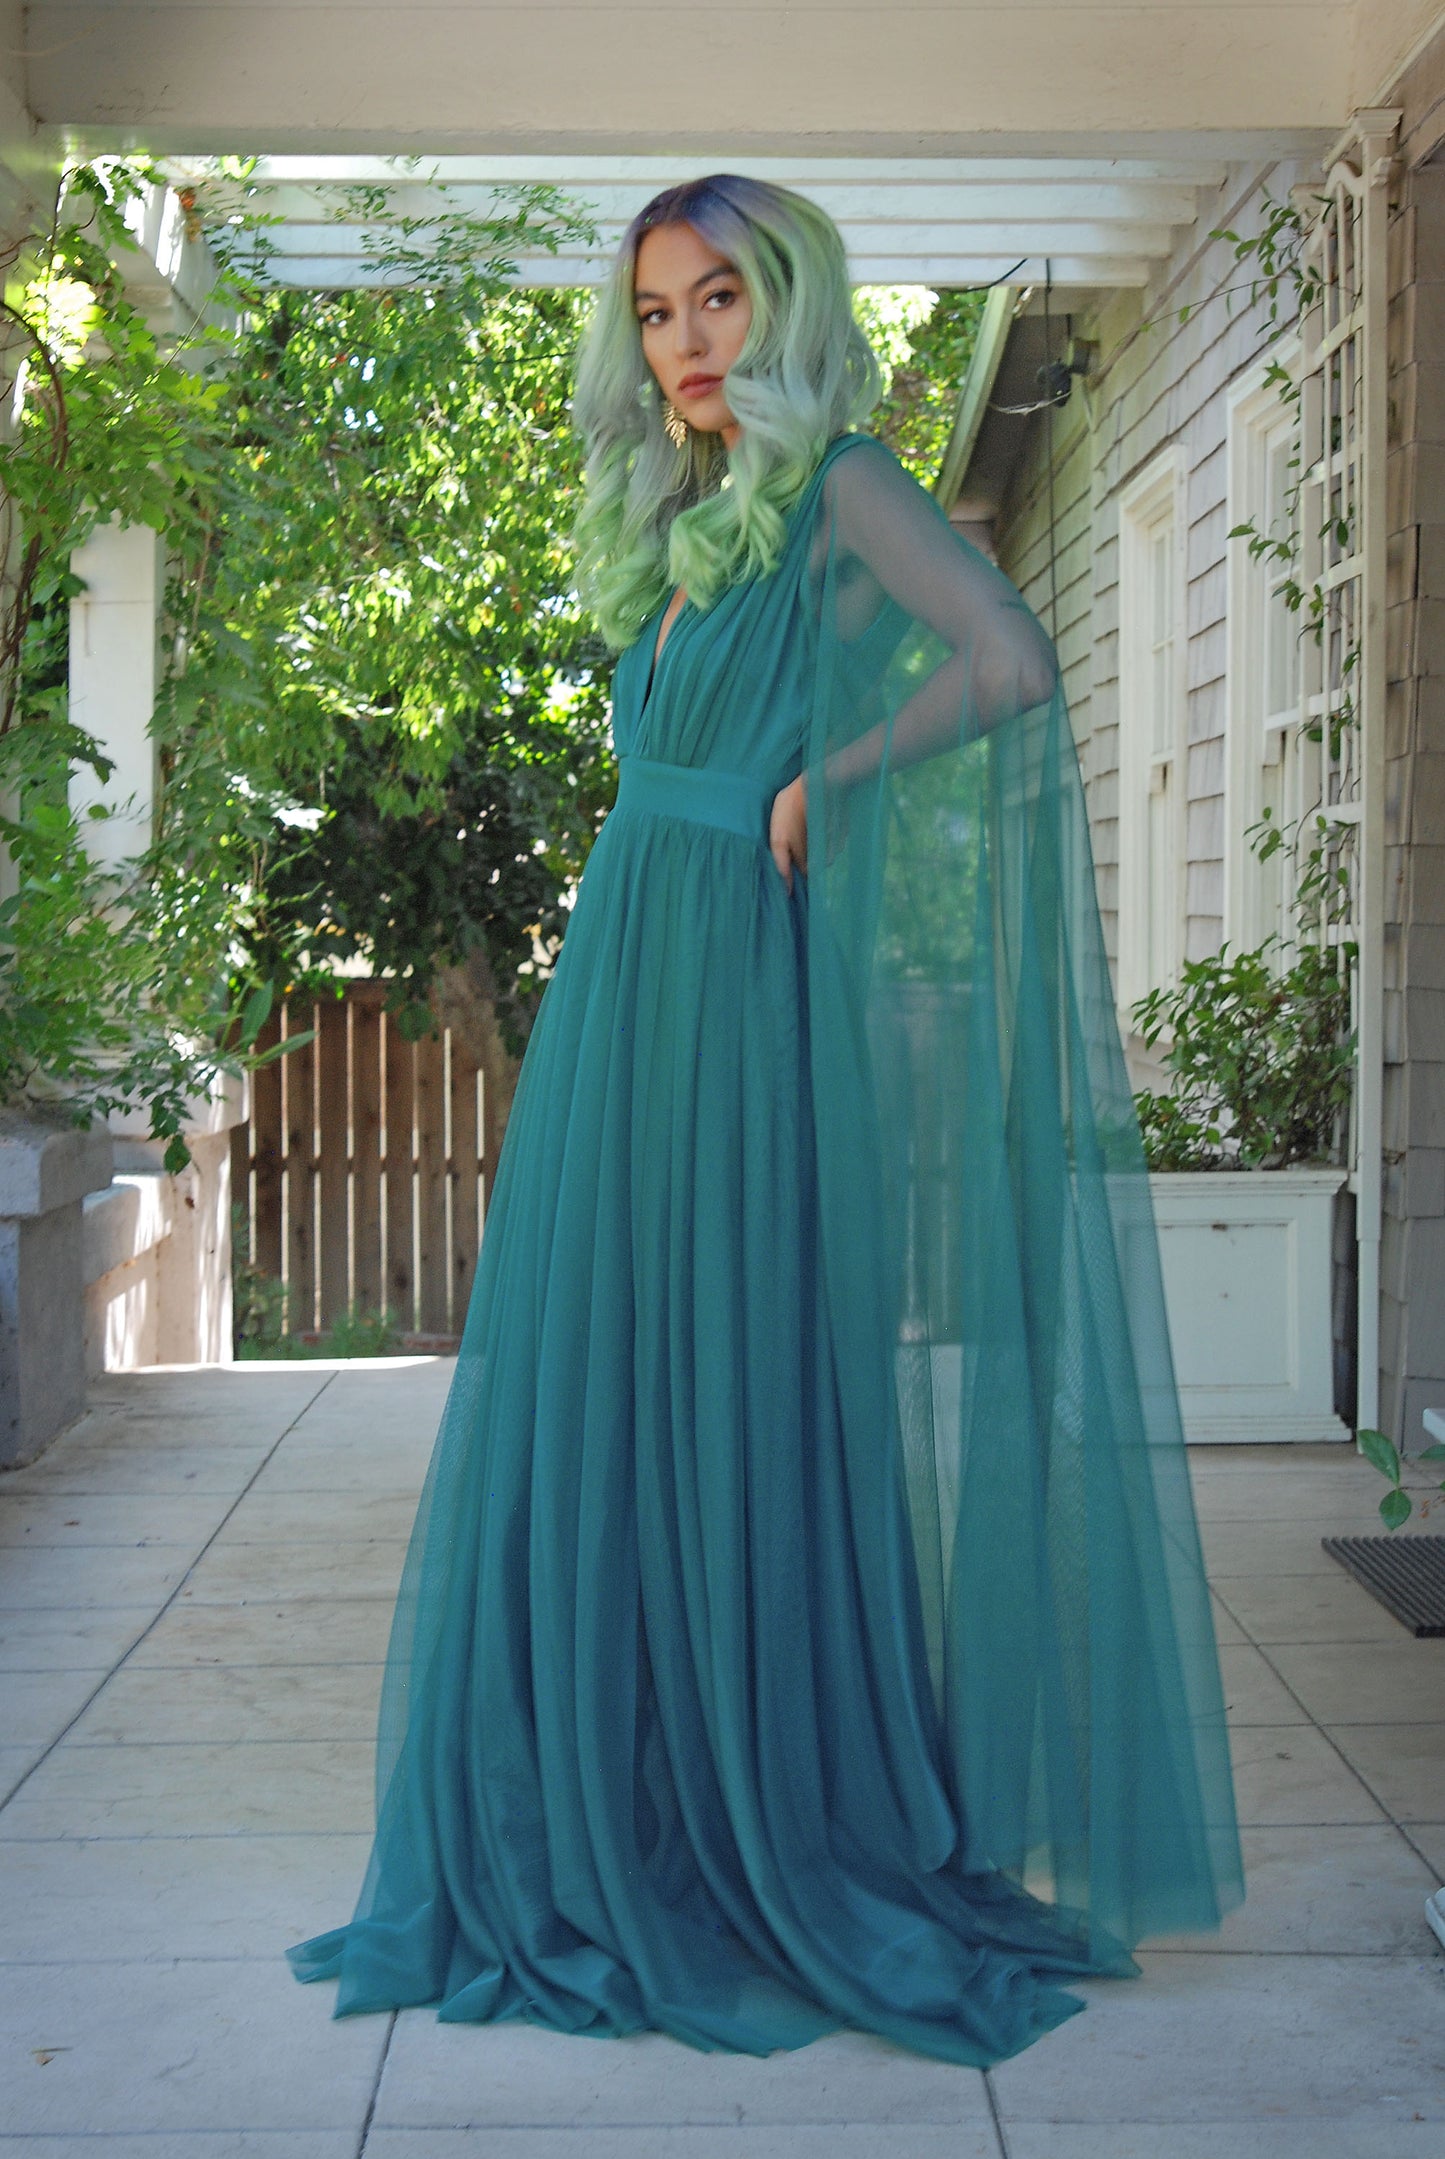 Gothic Glamour - Bombshell Plunge Maxi Gown in Peacock Green with Sheer Mesh Sleeves